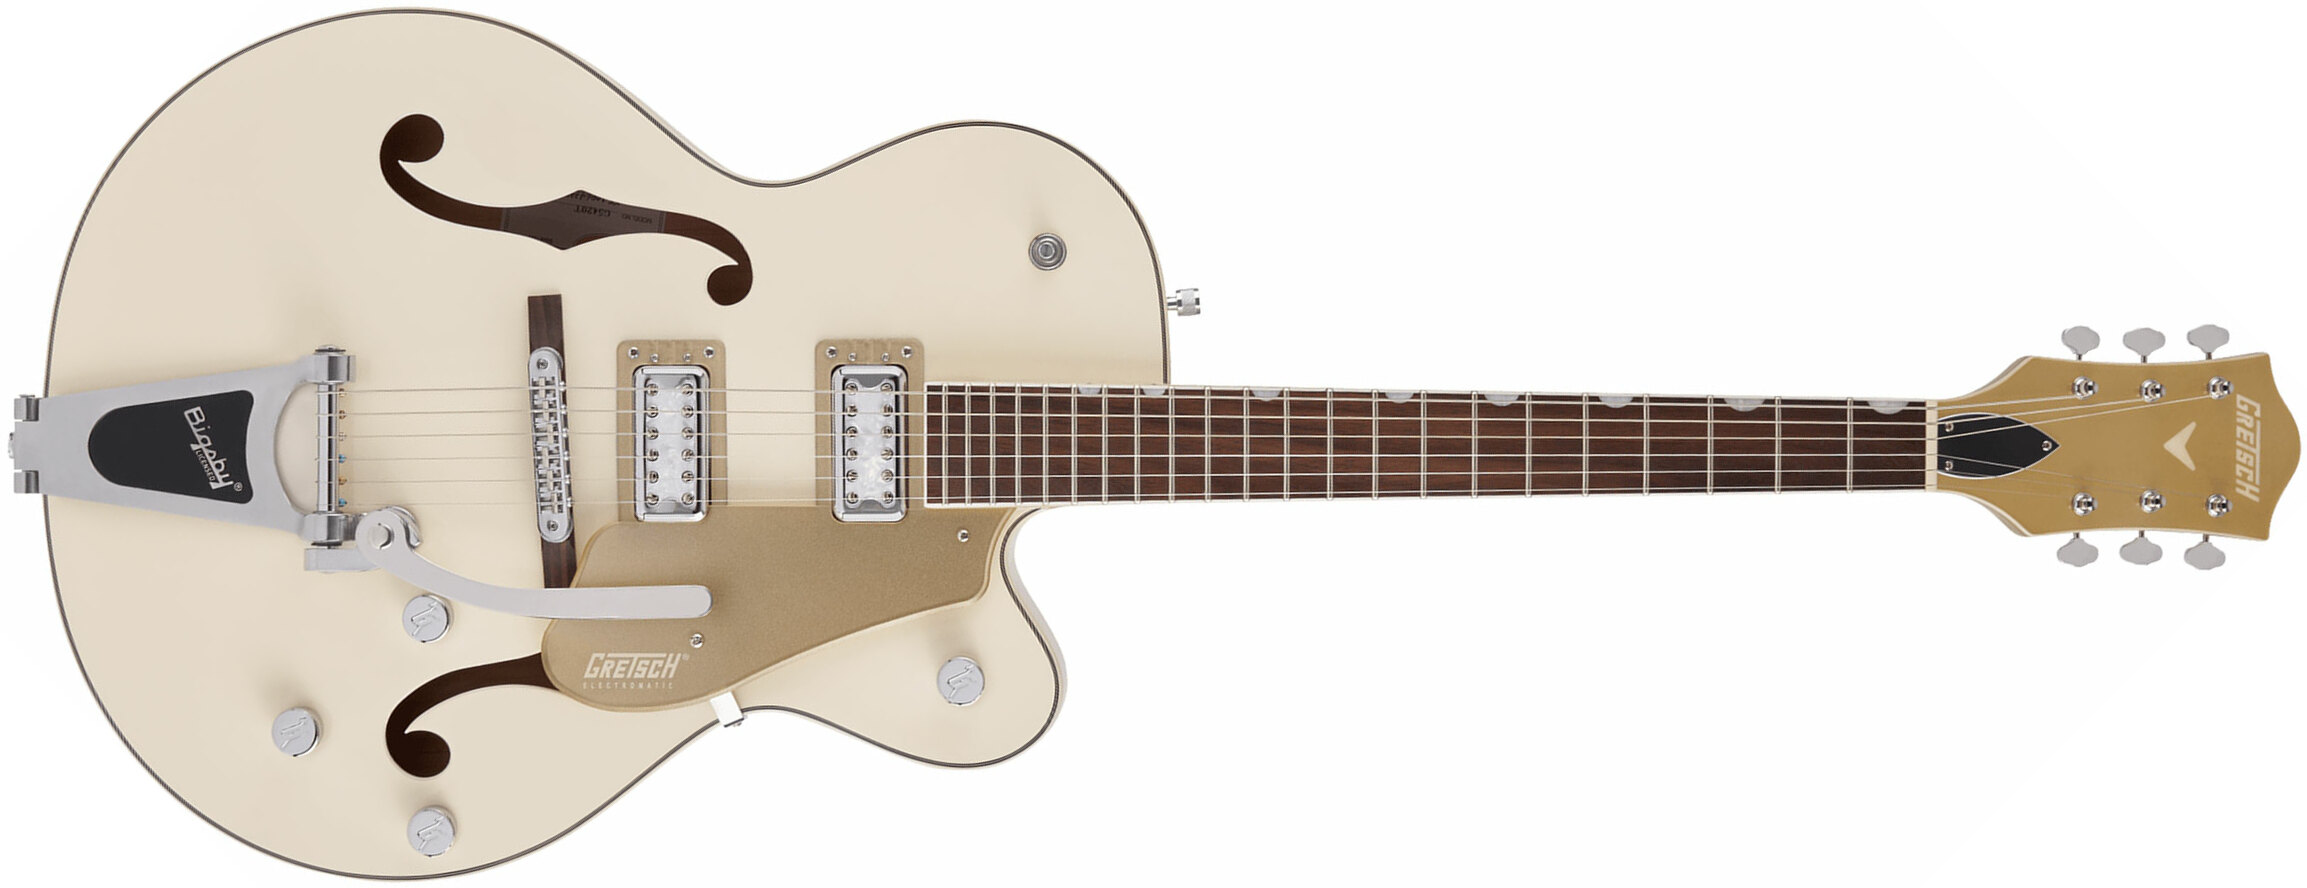 Gretsch G5410t Tri-five Electromatic Hollow Hh Bigsby Rw - Two-tone Vintage White/casino Gold - Semi-hollow electric guitar - Main picture